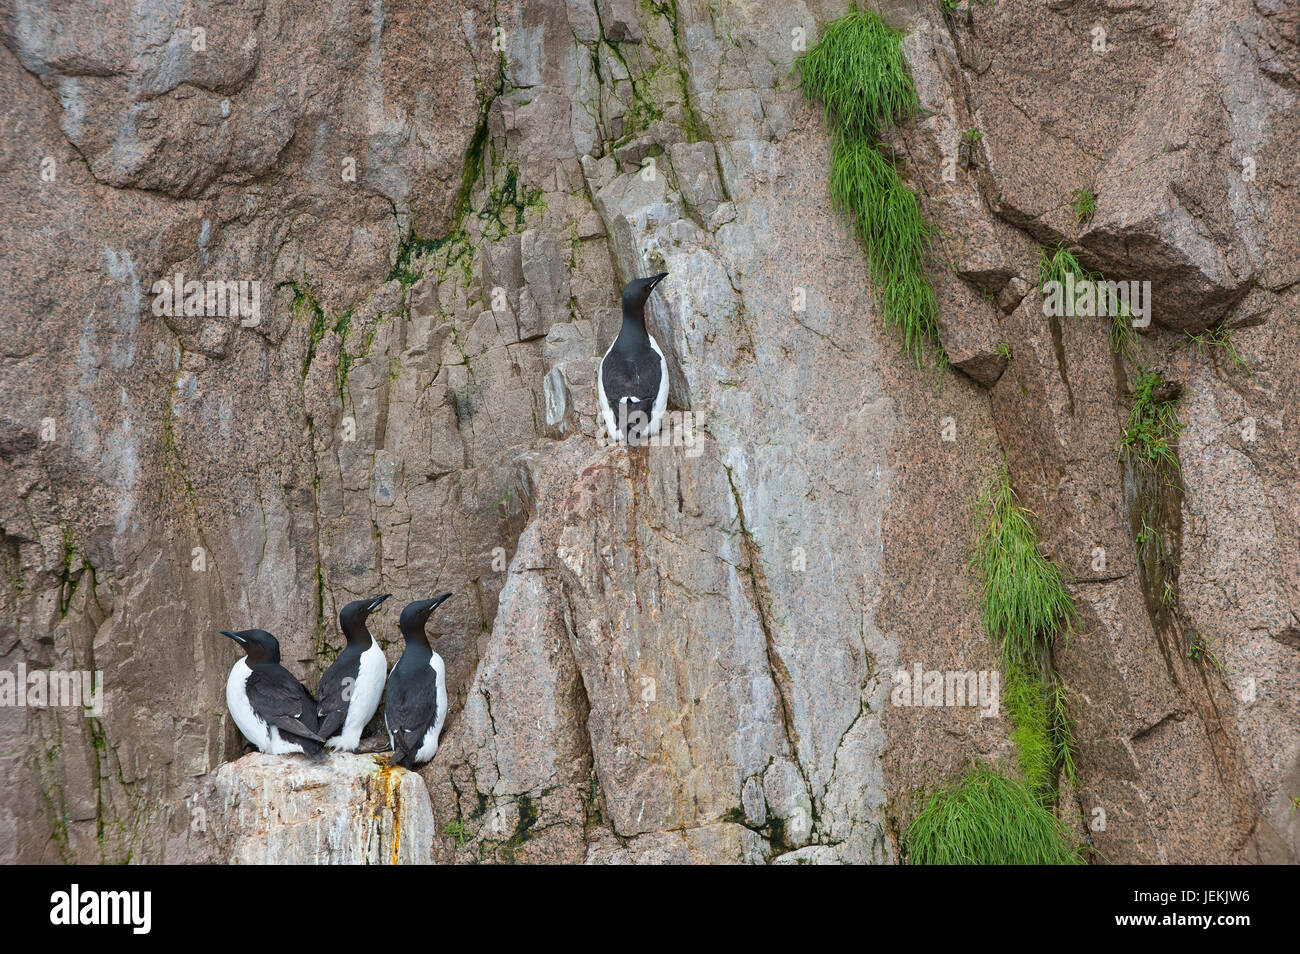 Brunnich's Guillemots (Uria lomvia) or Thick-billed Murres on the cliffs of Cape Achen, Chukotka, Russia Stock Photo